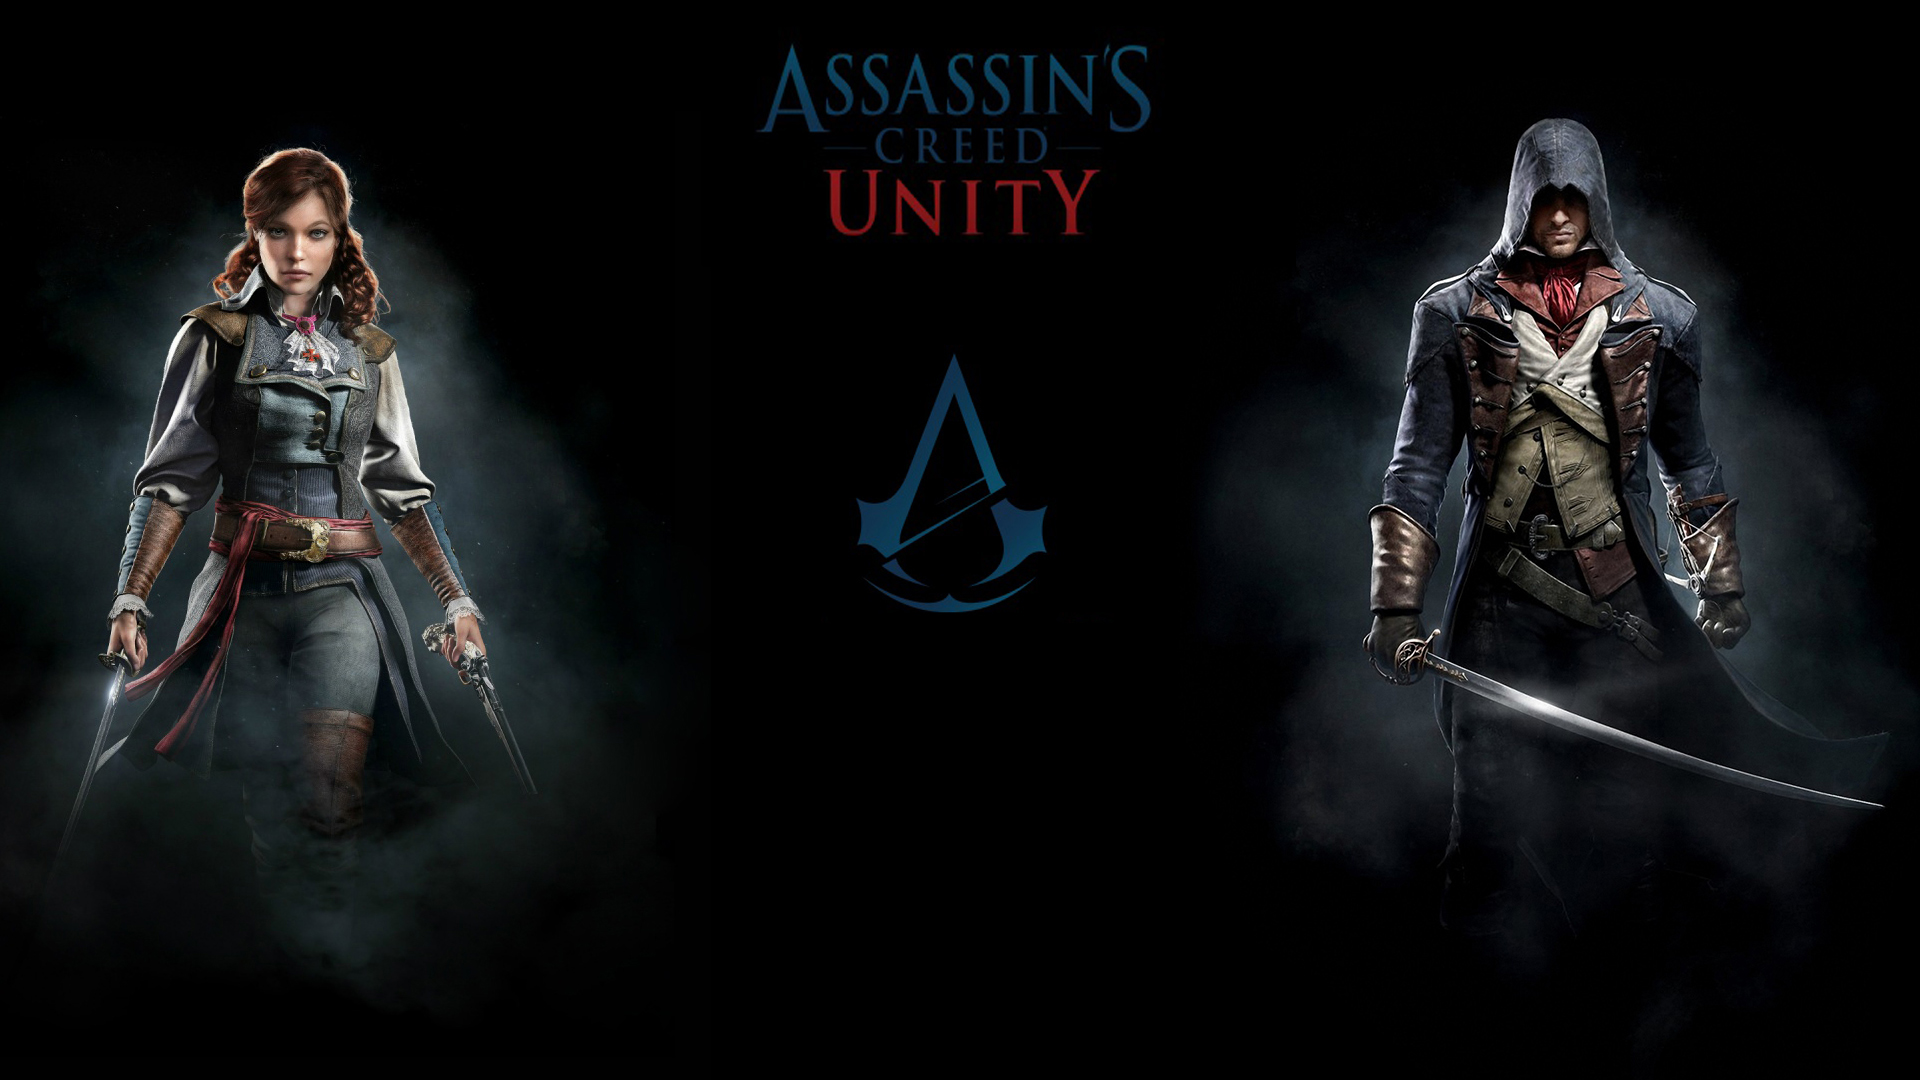 Assassin's Creed Unity Arno Dorian / Elise Poster by MatrixUnlimited ...